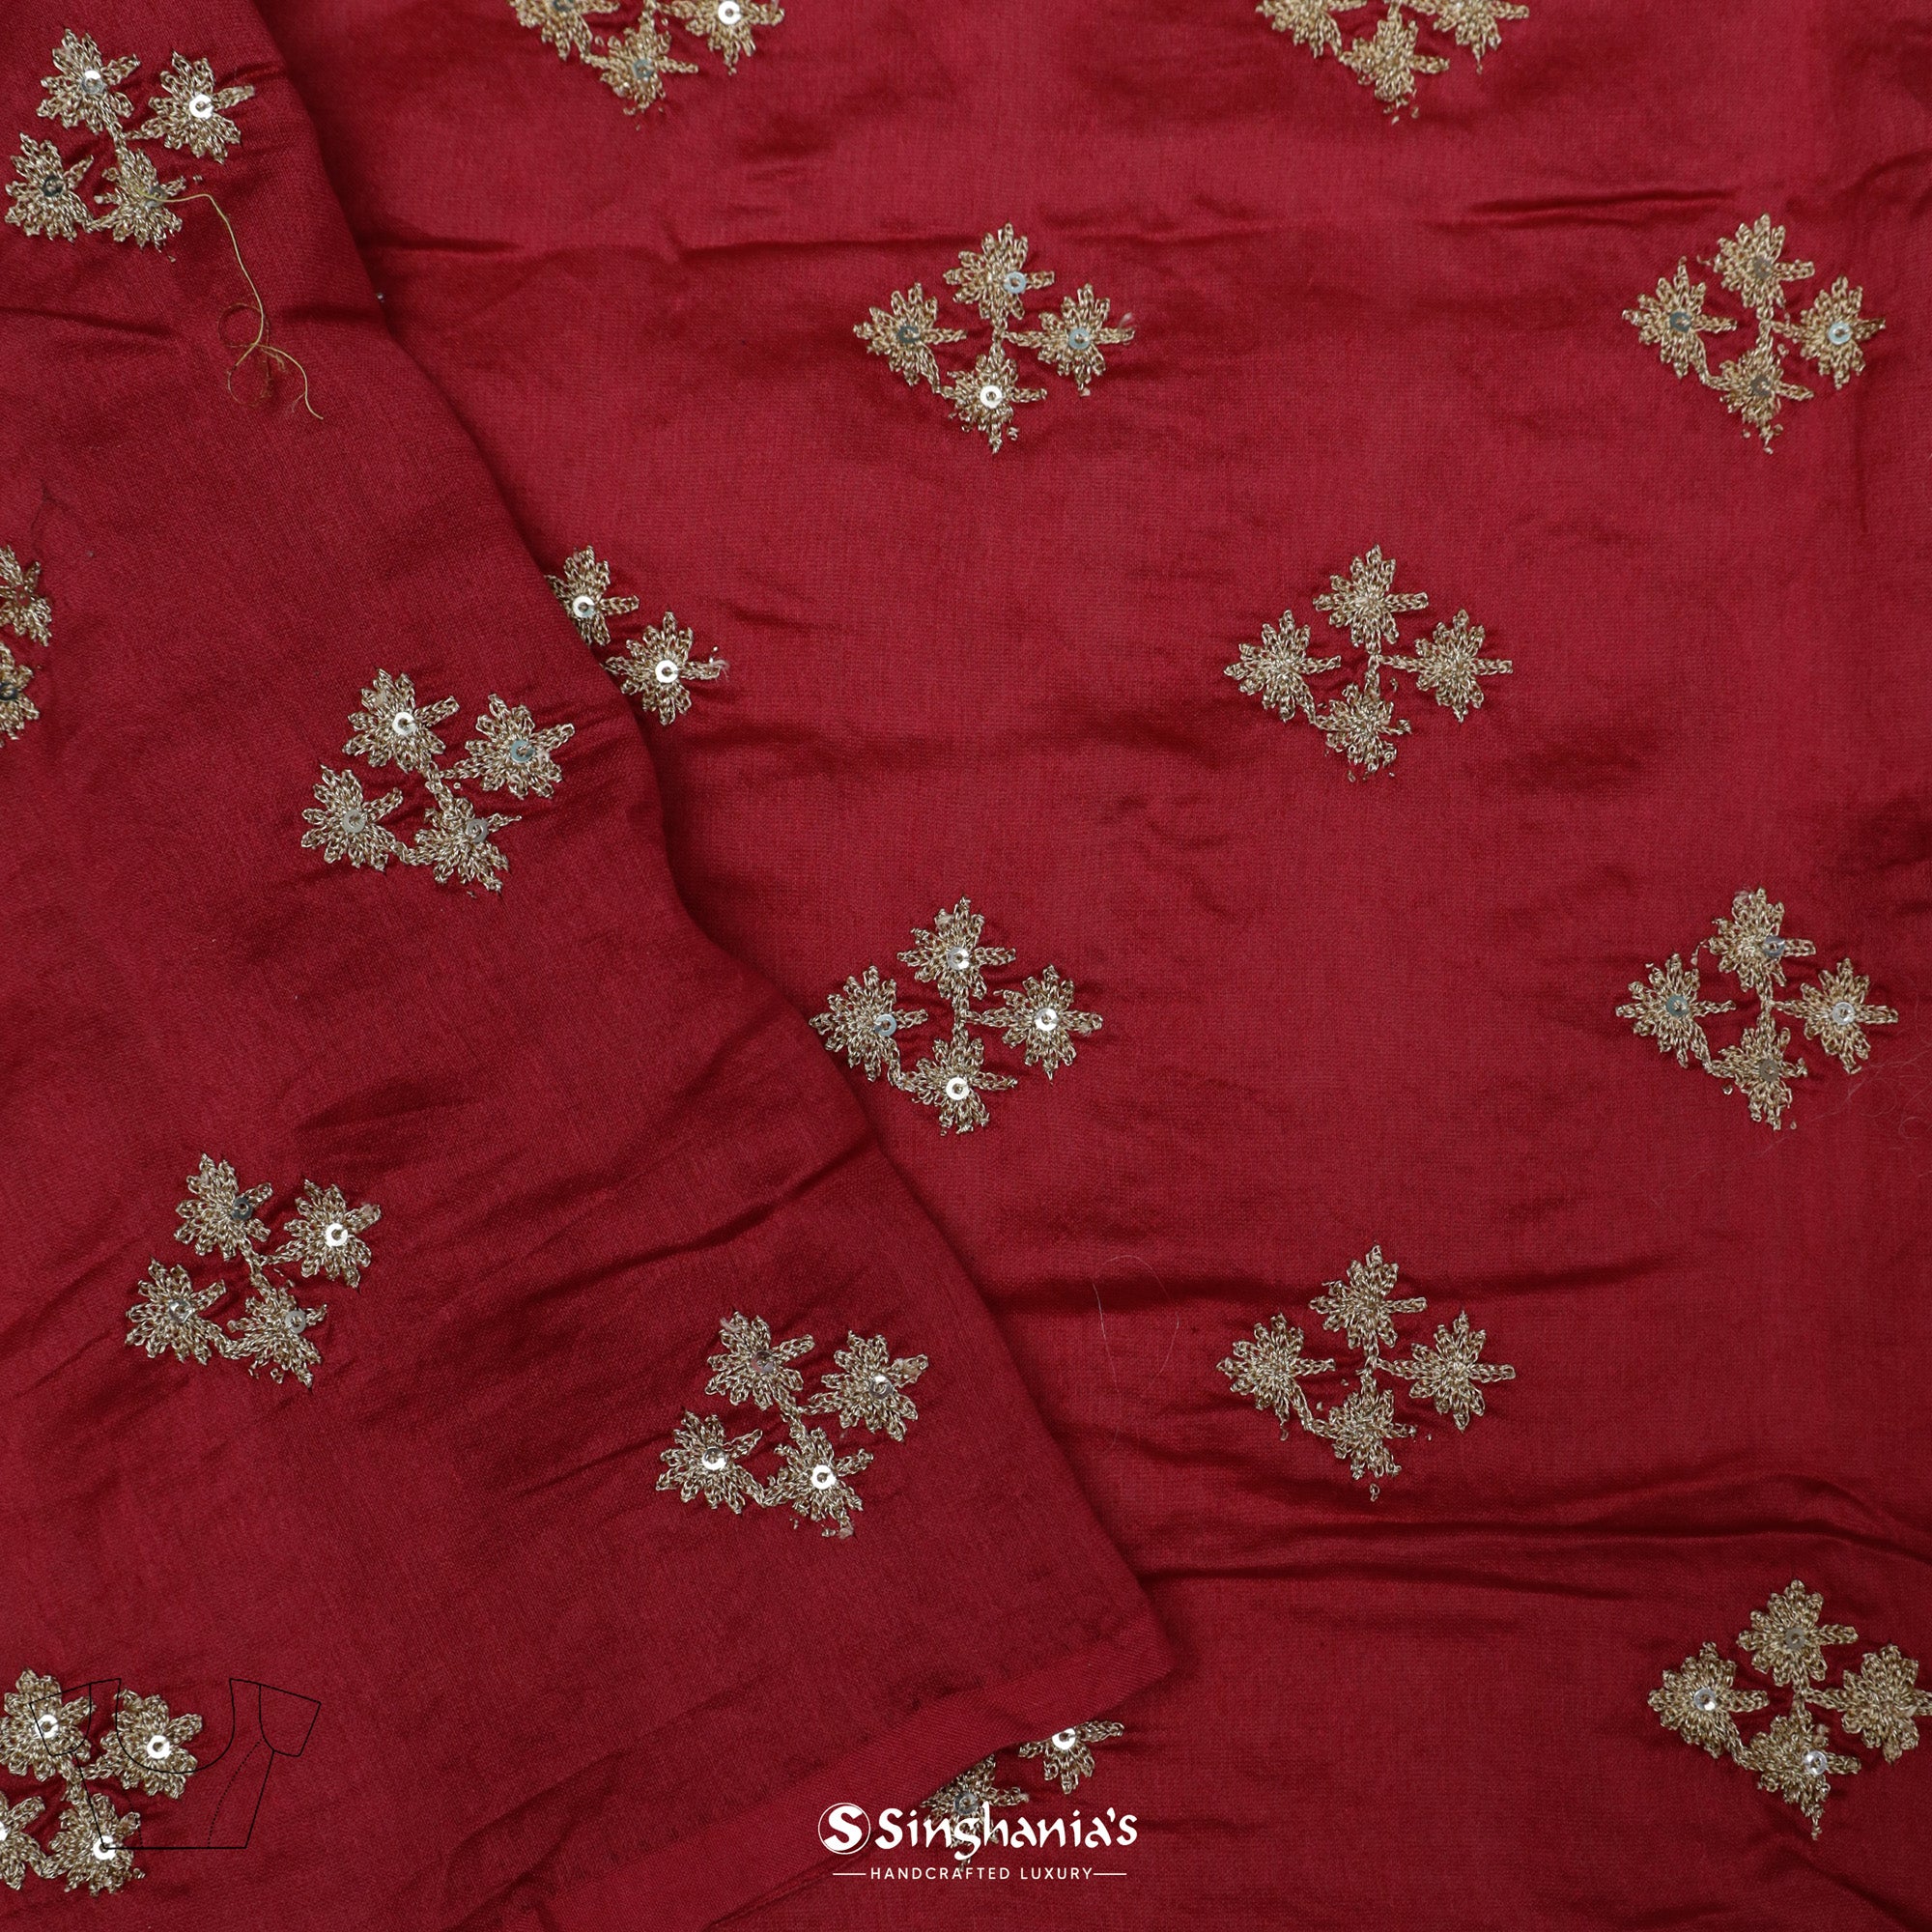 Sanguine Red Printed Matka Saree With Floral Pattern